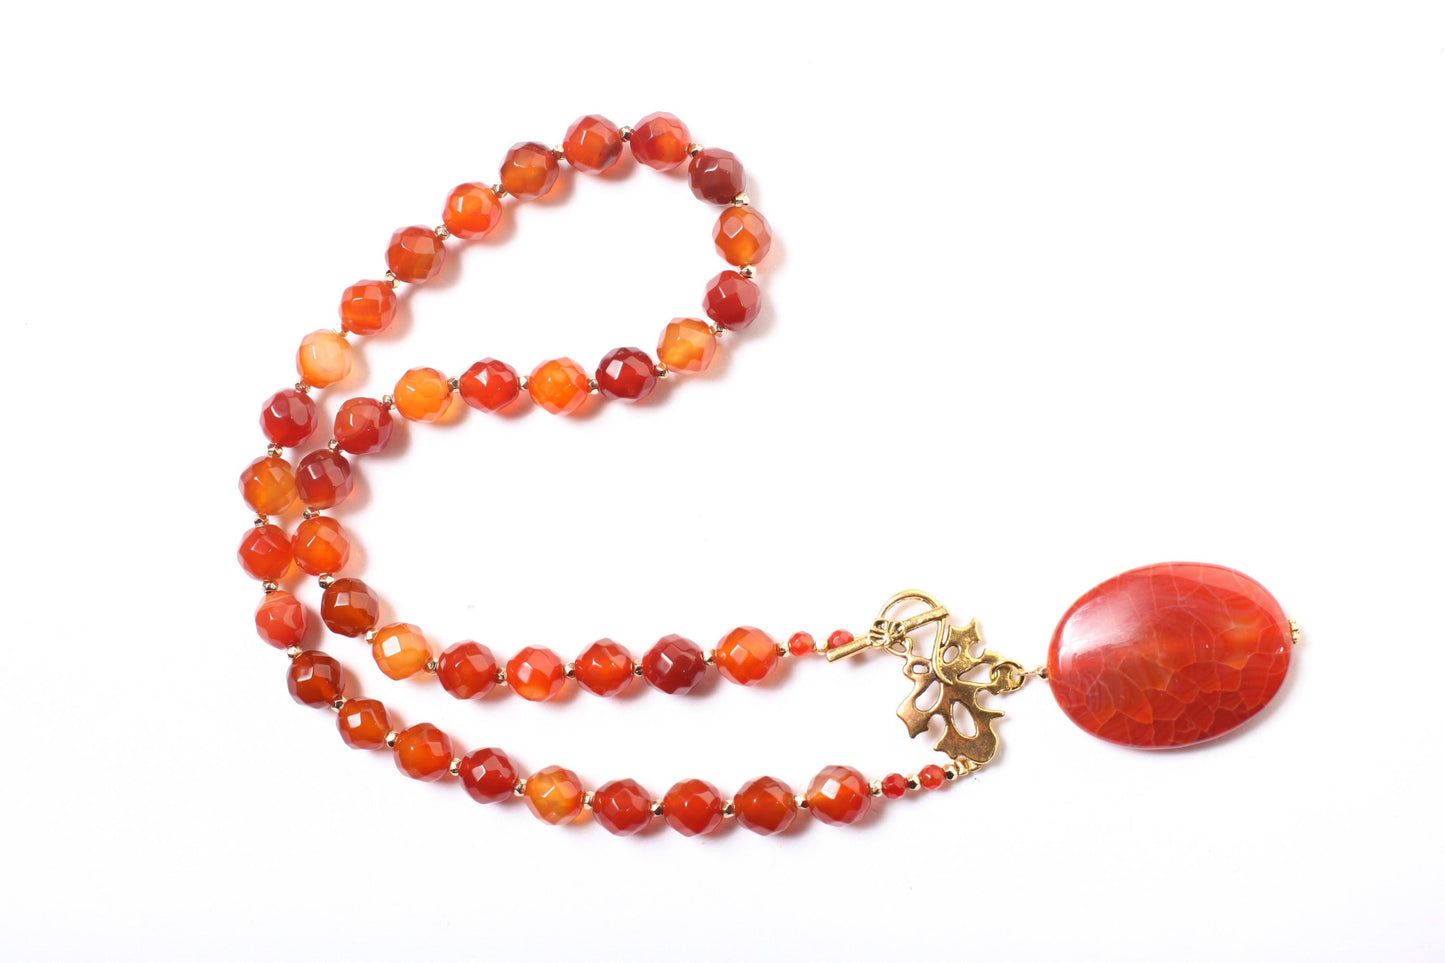 Carnelian Necklace, Natural Carnelian Faceted with Dangling Fire Agate Oval Pendant, Antiqued Gold Fancy Leaf Toggle Clasp,Gift 20&quot; Necklace